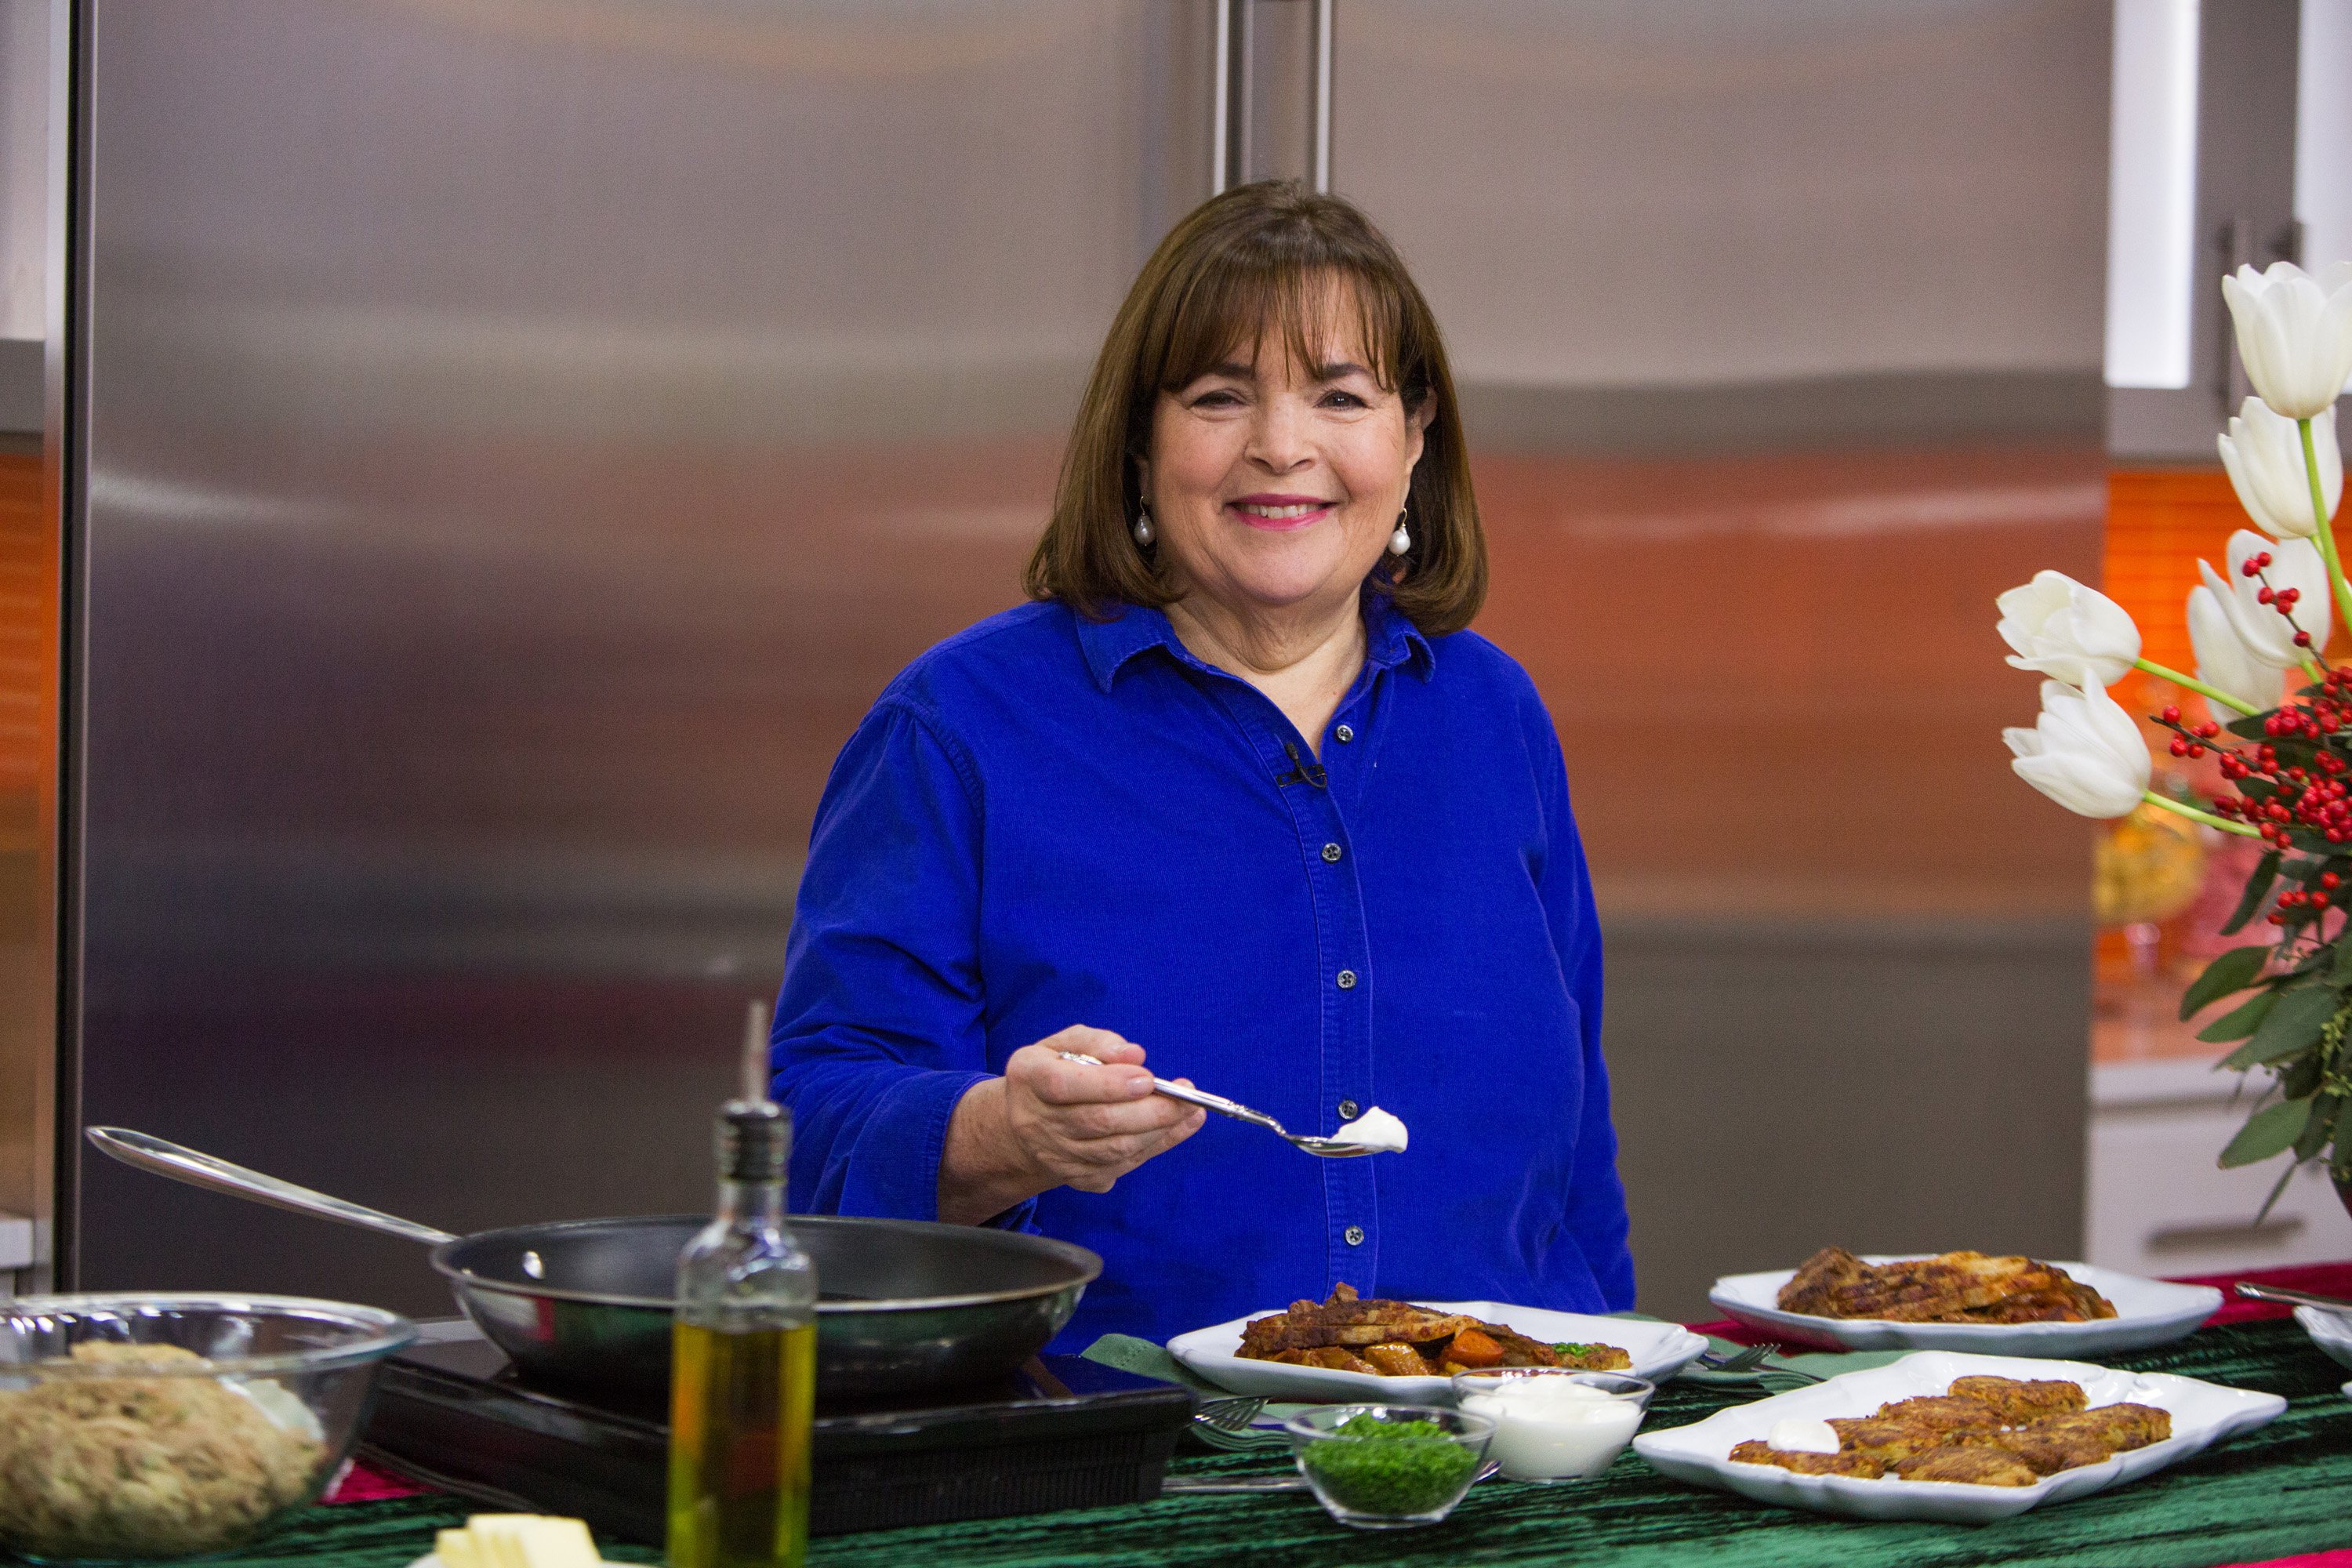 Ina Garten on the 'Today' show | Nathan Congleton/NBCU Photo Bank/NBCUniversal via Getty Images via Getty Images